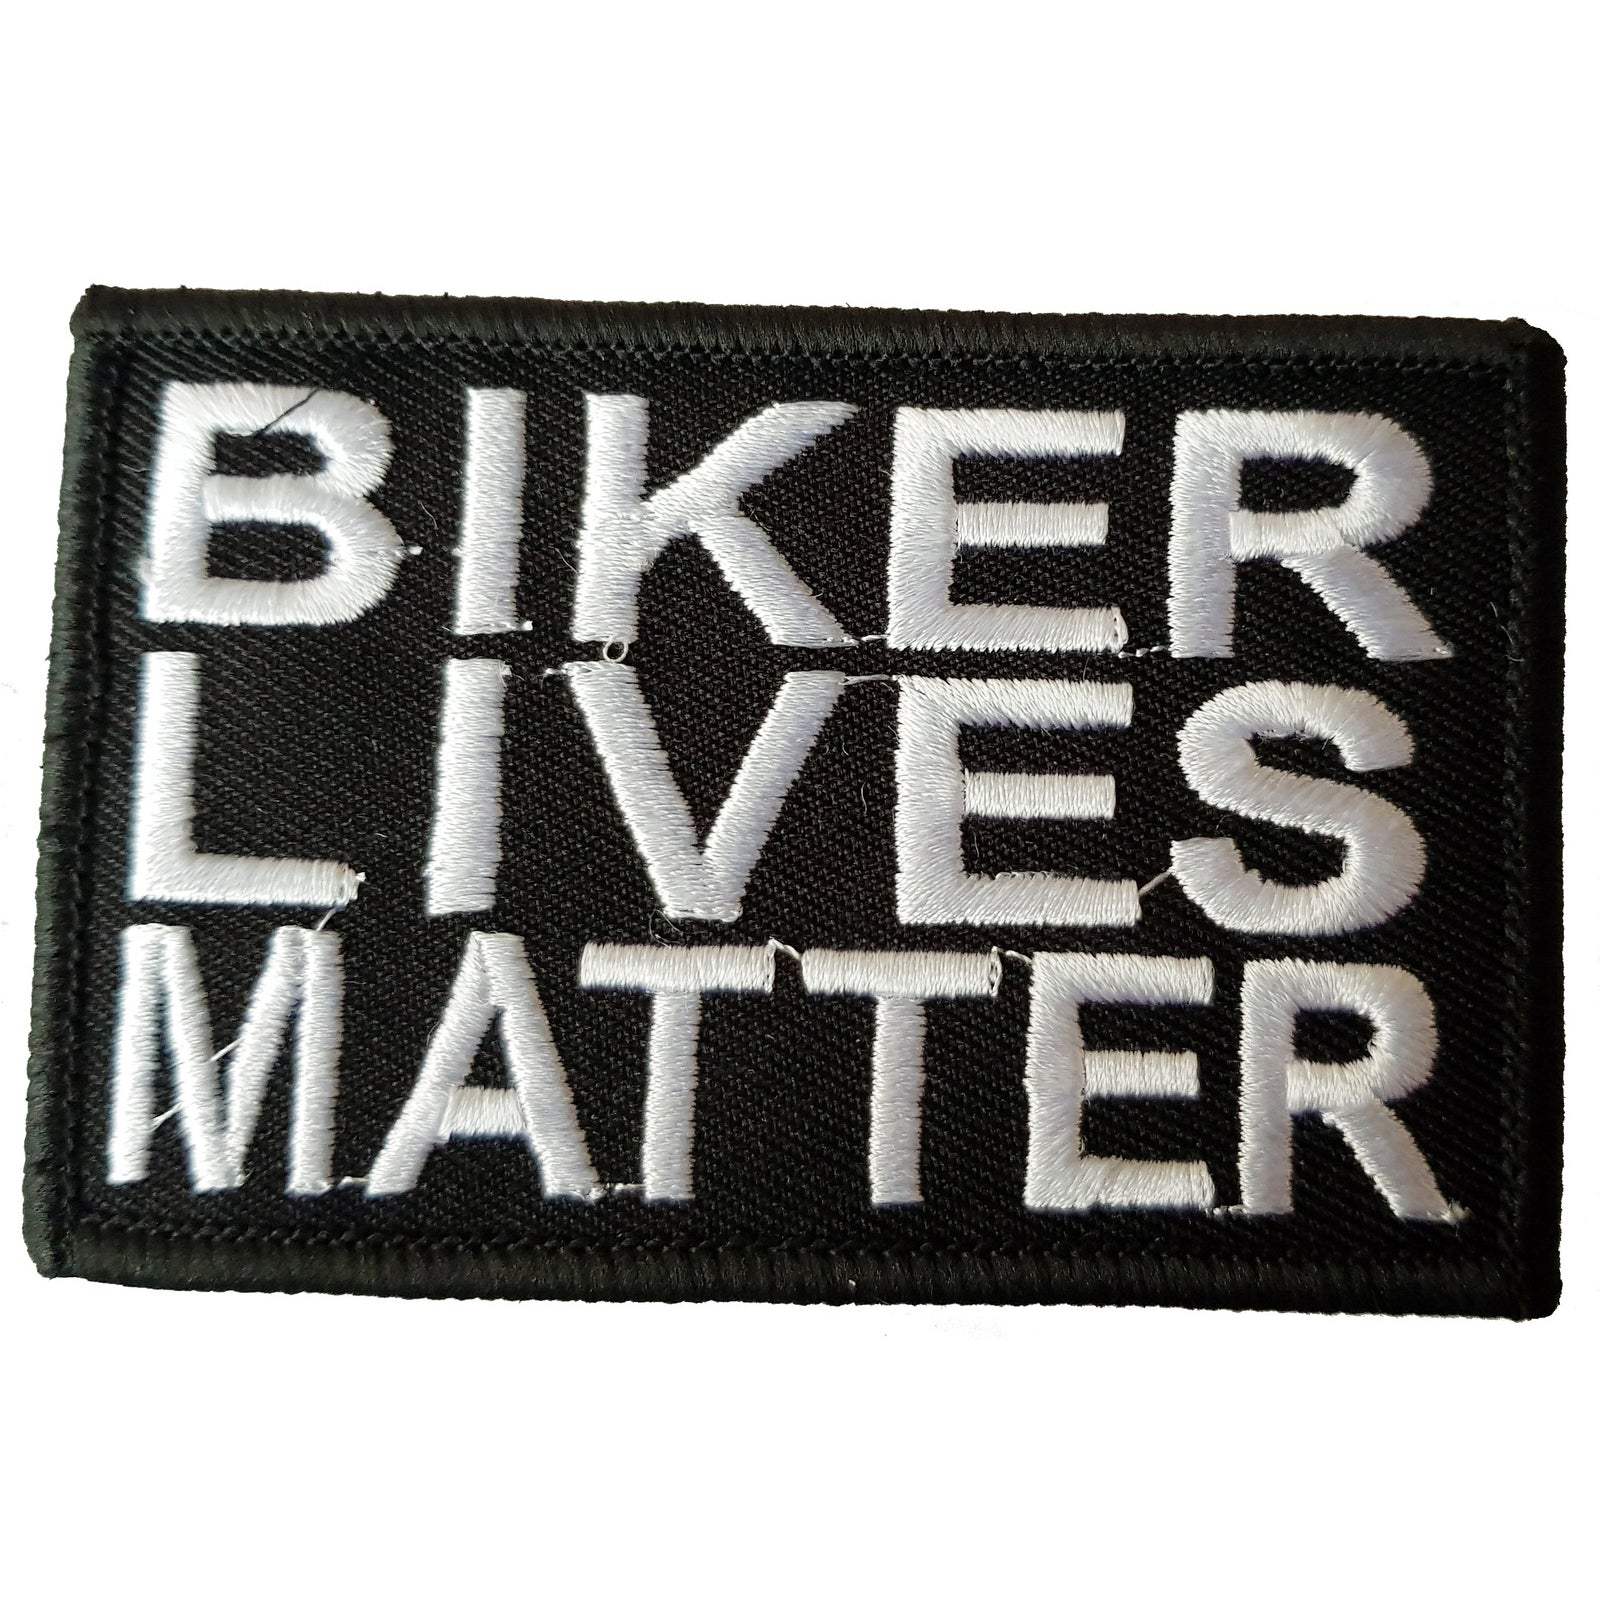 Fabric Motorcycle Patch